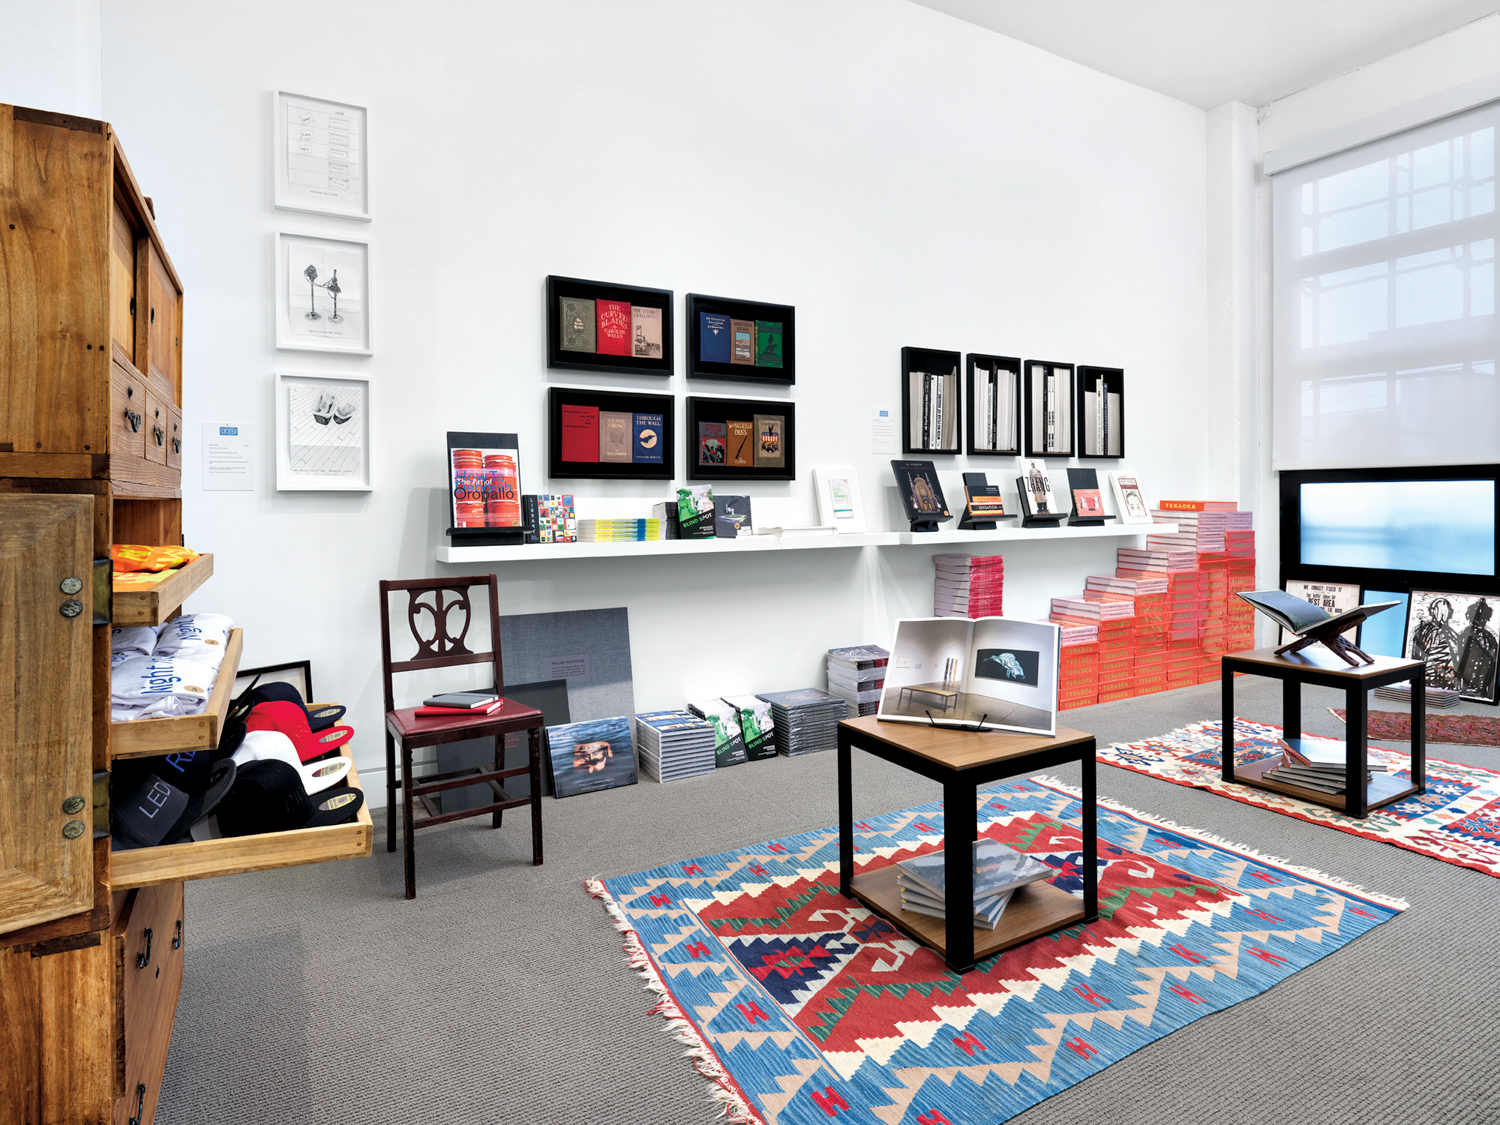 Catharine Clark Gallery store with framed small artworks and tables full of books atop colorful patterned rugs